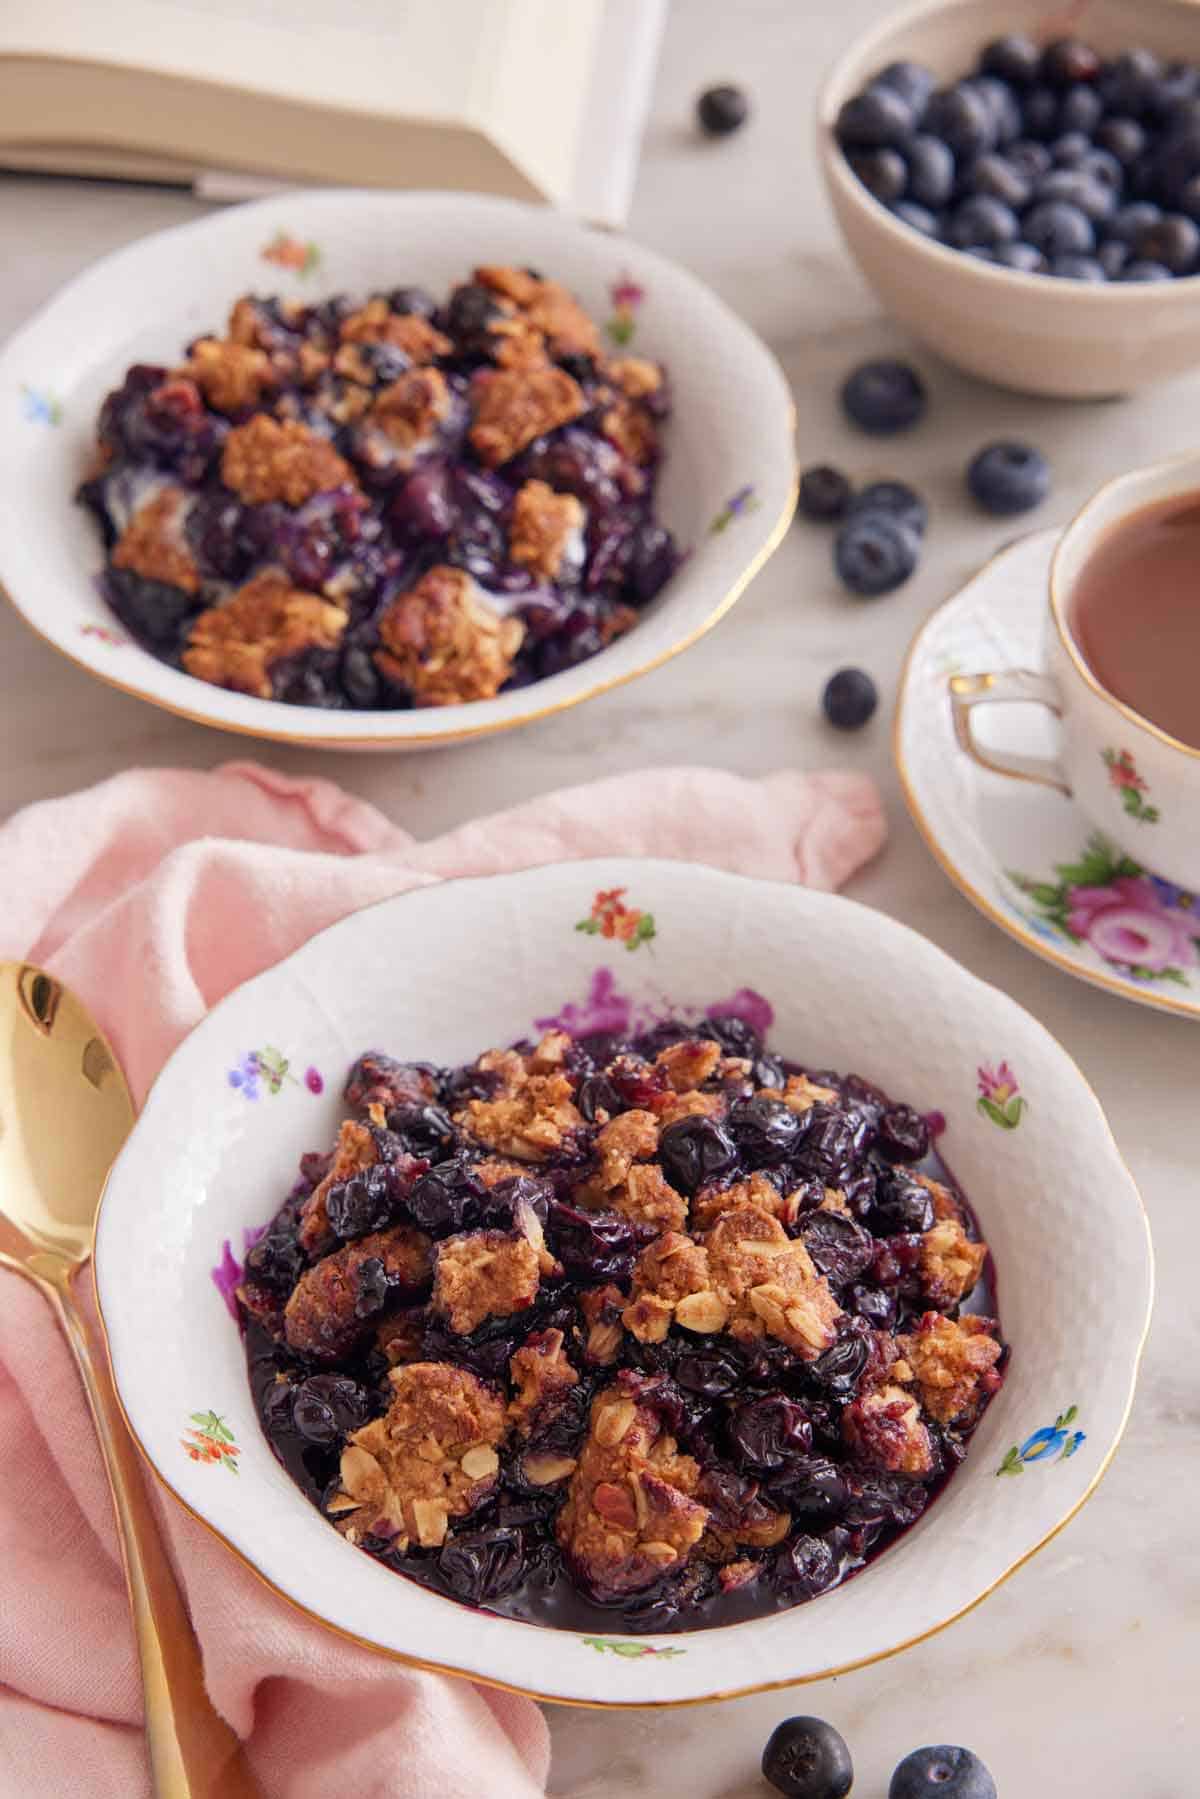 Two bowls of blueberry crisp with one in the background with a bowl of blueberries.